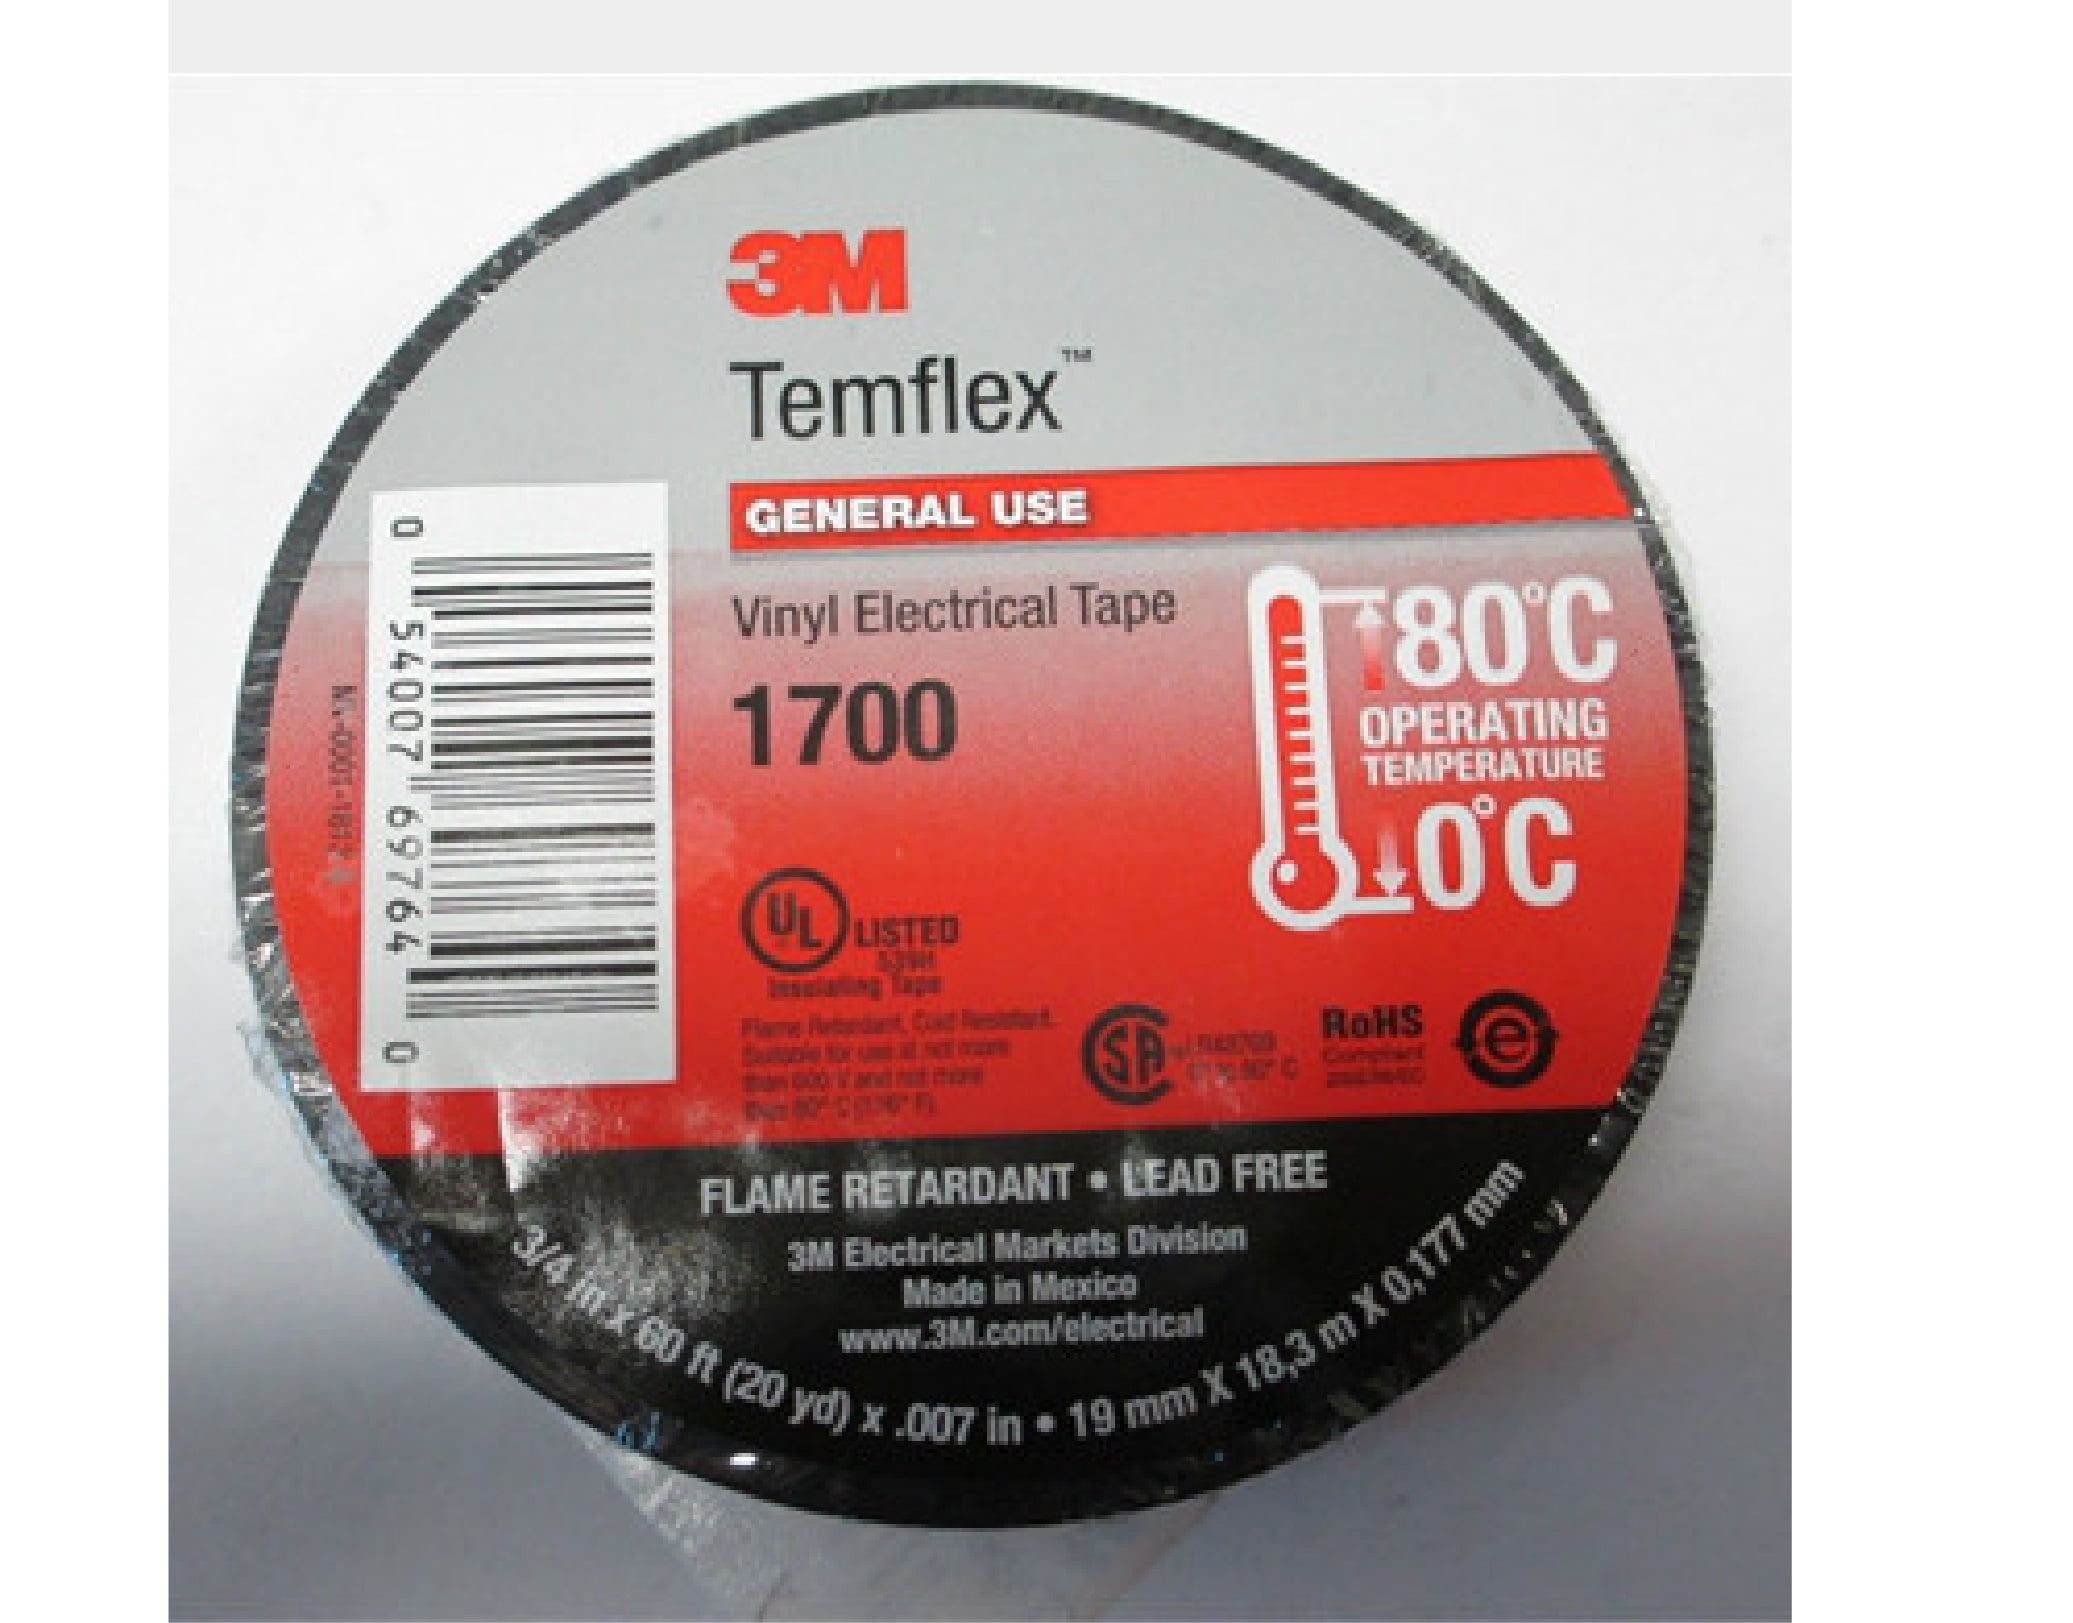 20 ROLLS OF 3M 1700 TEMFLEX 3/4" X 60' BLACK ELECTRICAL TAPE 3 M ELECTRIC TAPES 